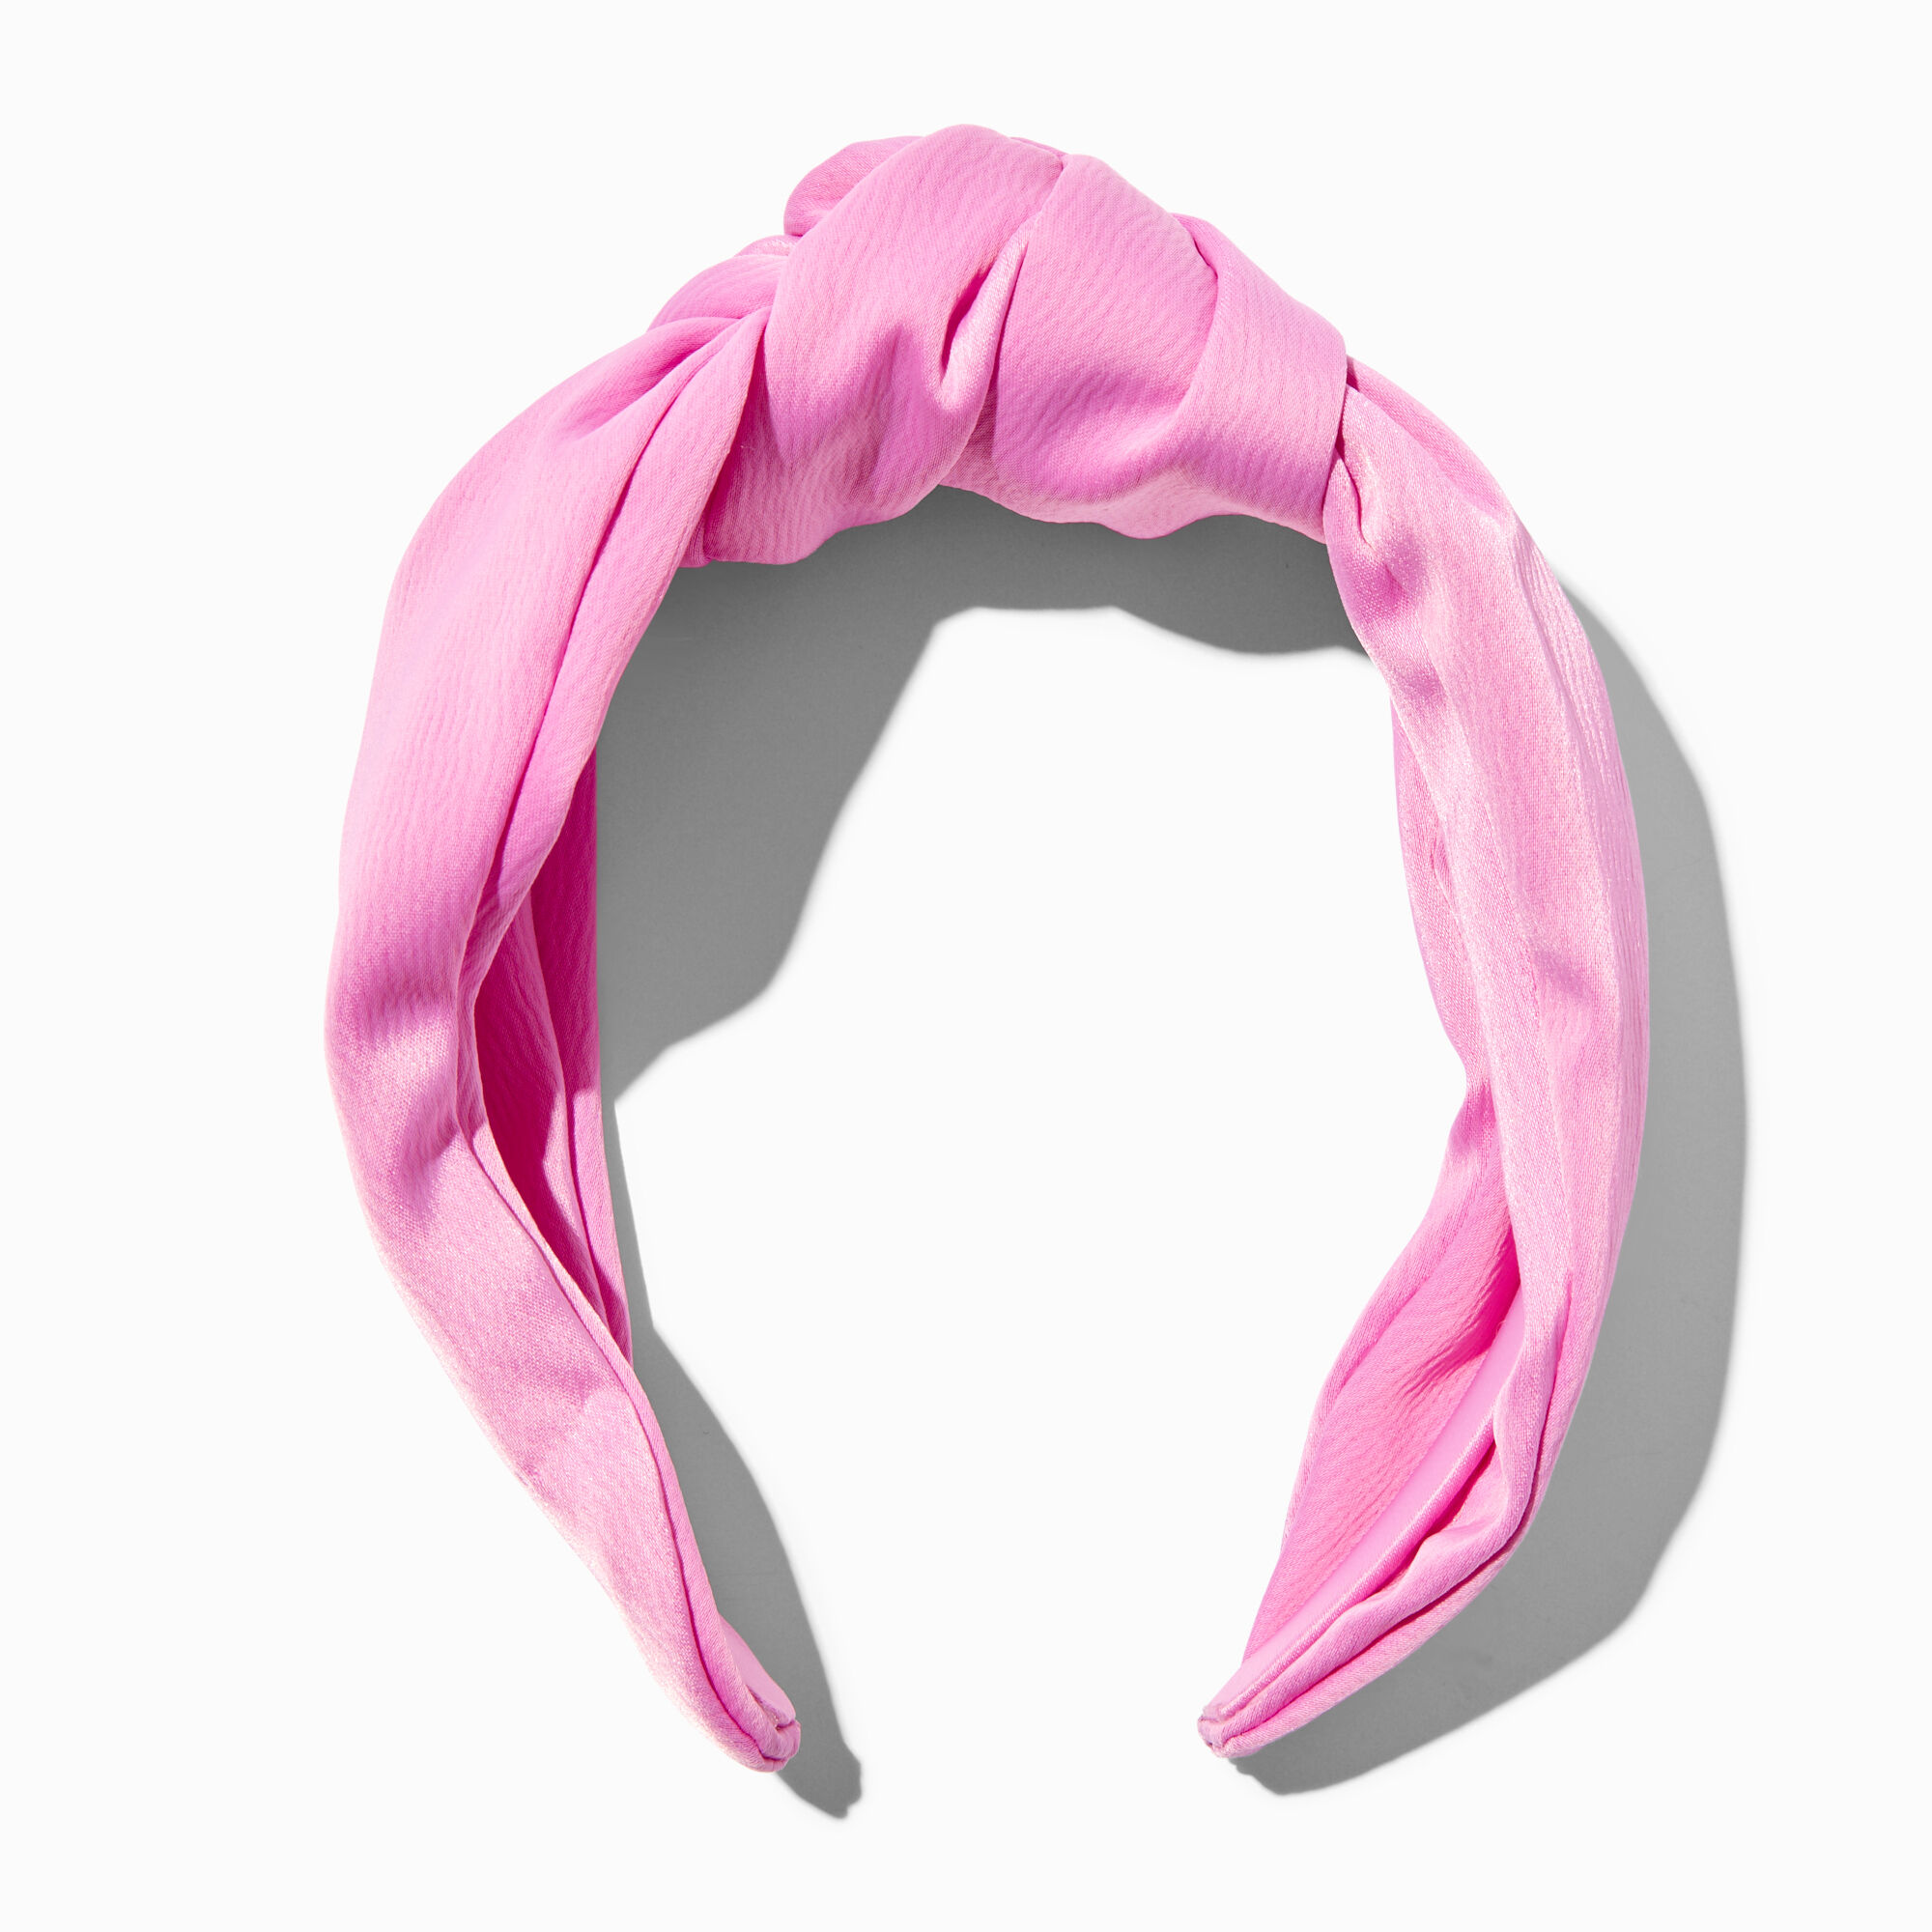 View Claires Bright Textured Knotted Headband Pink information